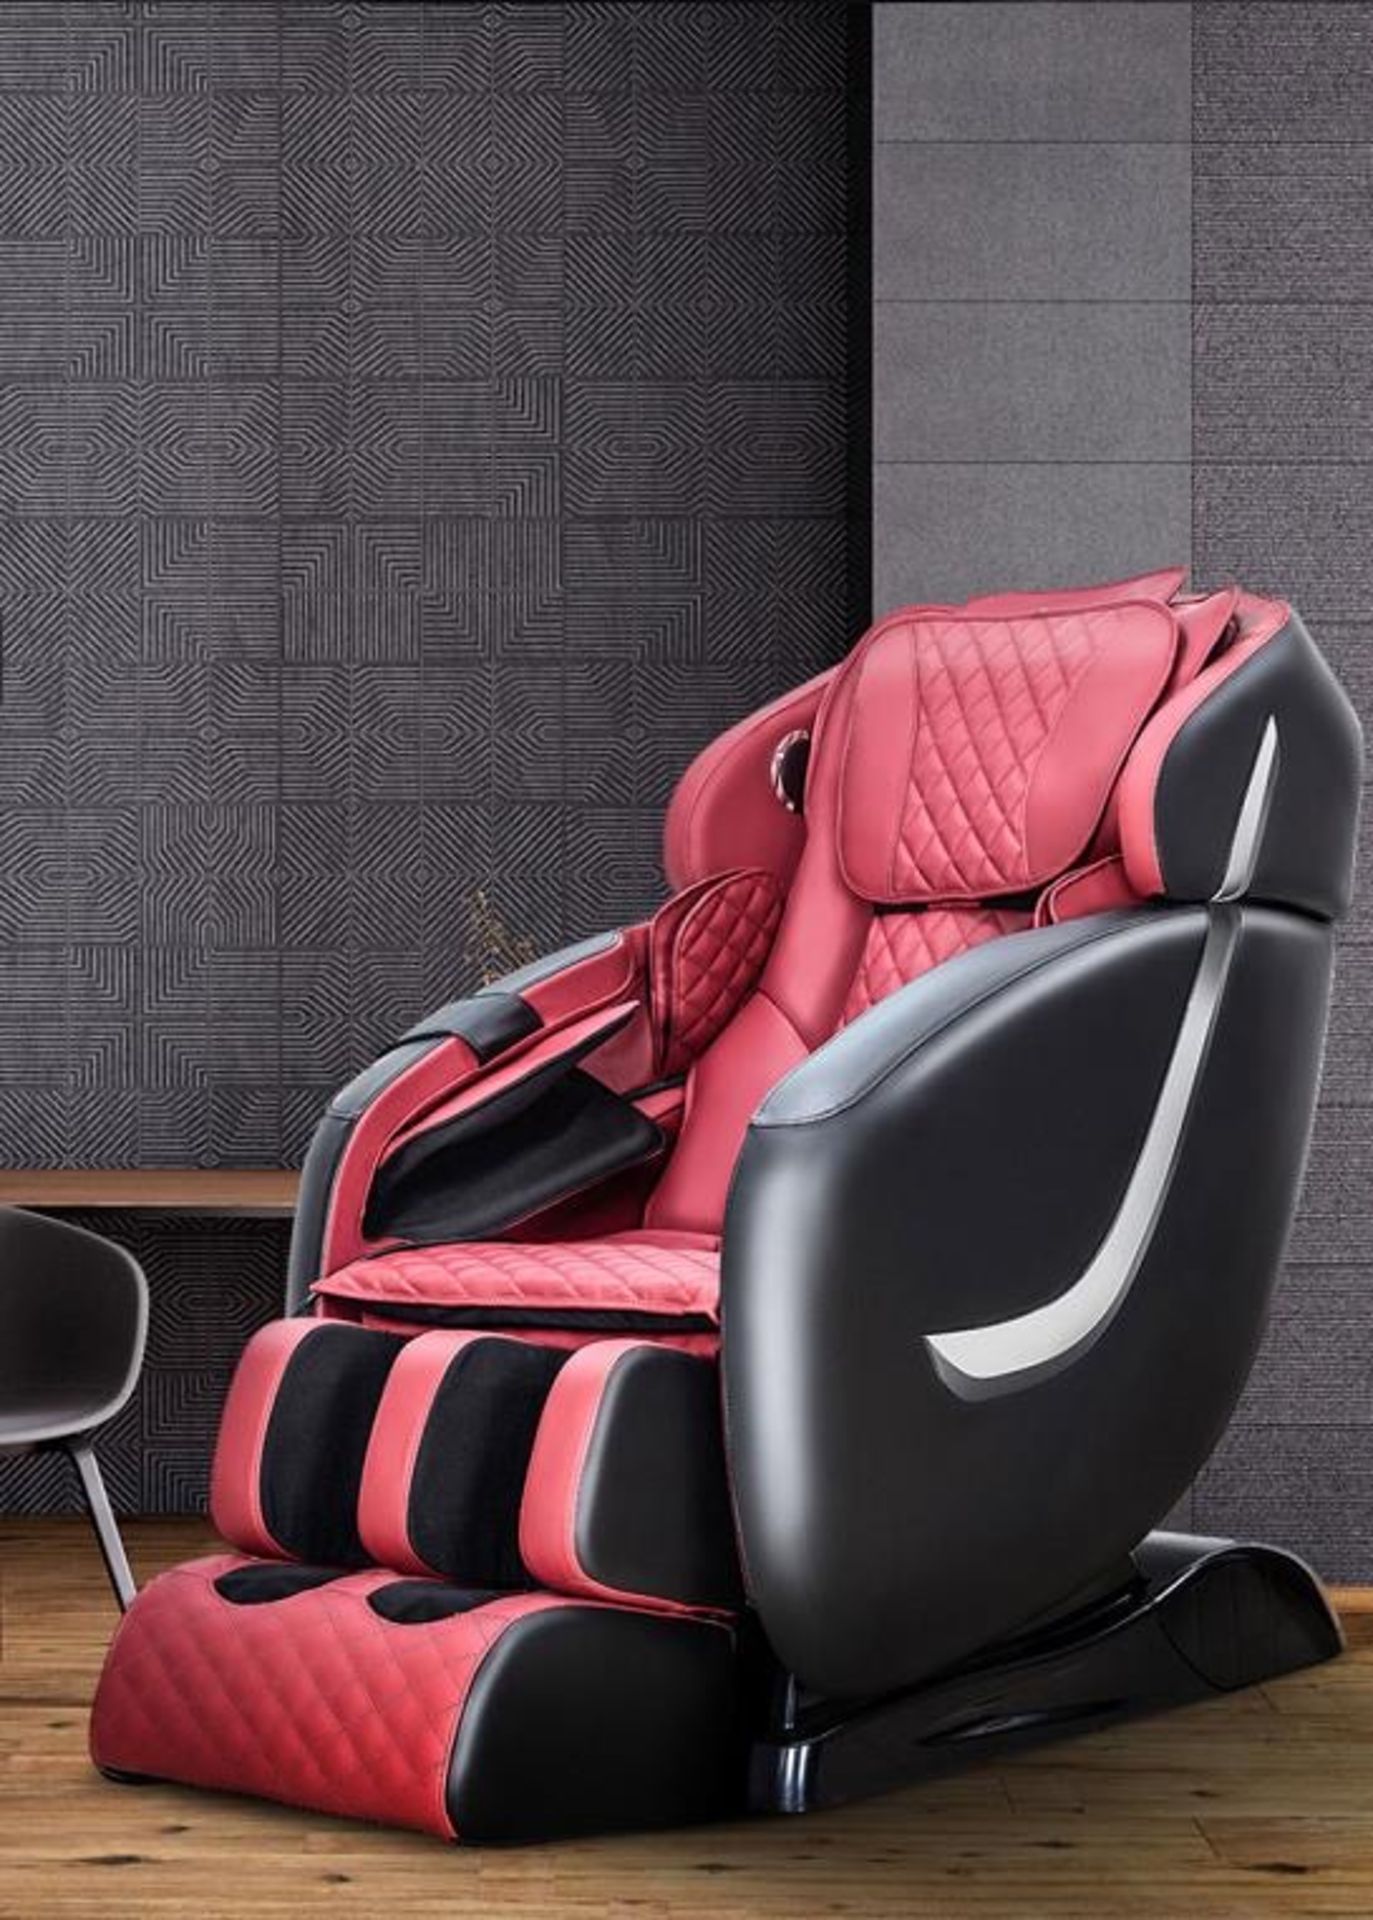 Brand New in Box MiComfort Full Body 4D SL Track Massage Chair in Red